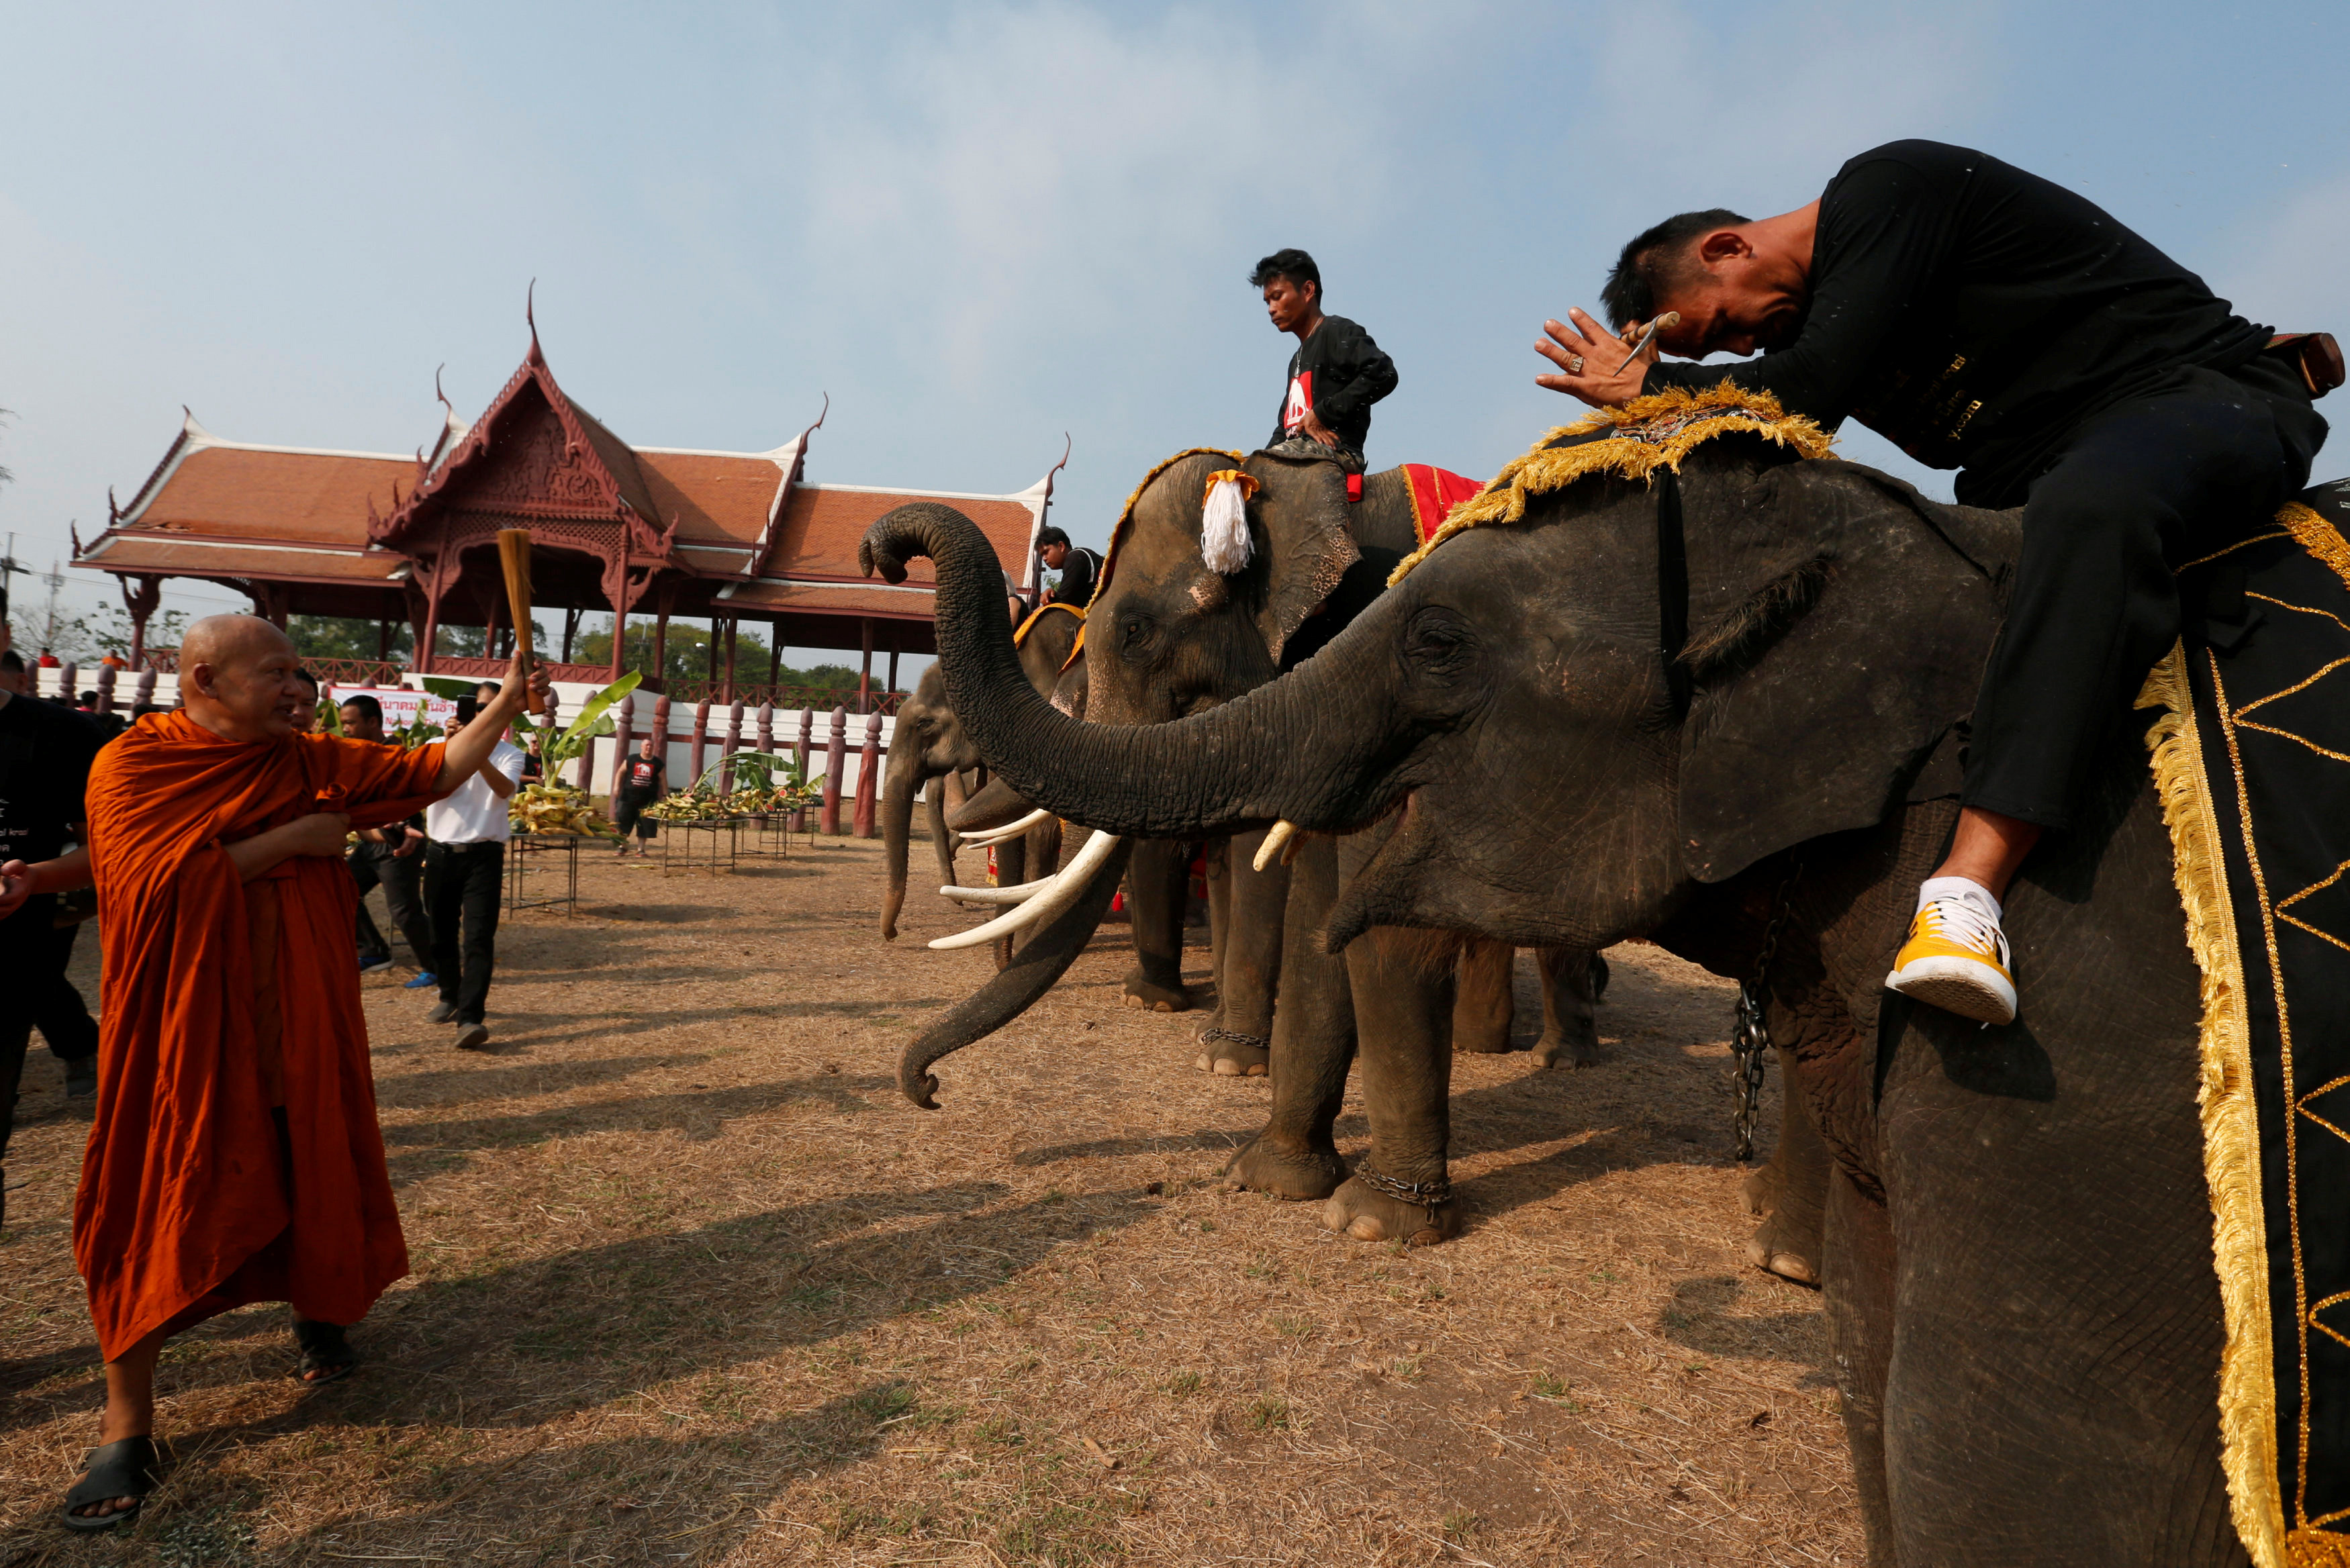 Buffet for elephants as Thailand celebrates national animal - Times of Oman